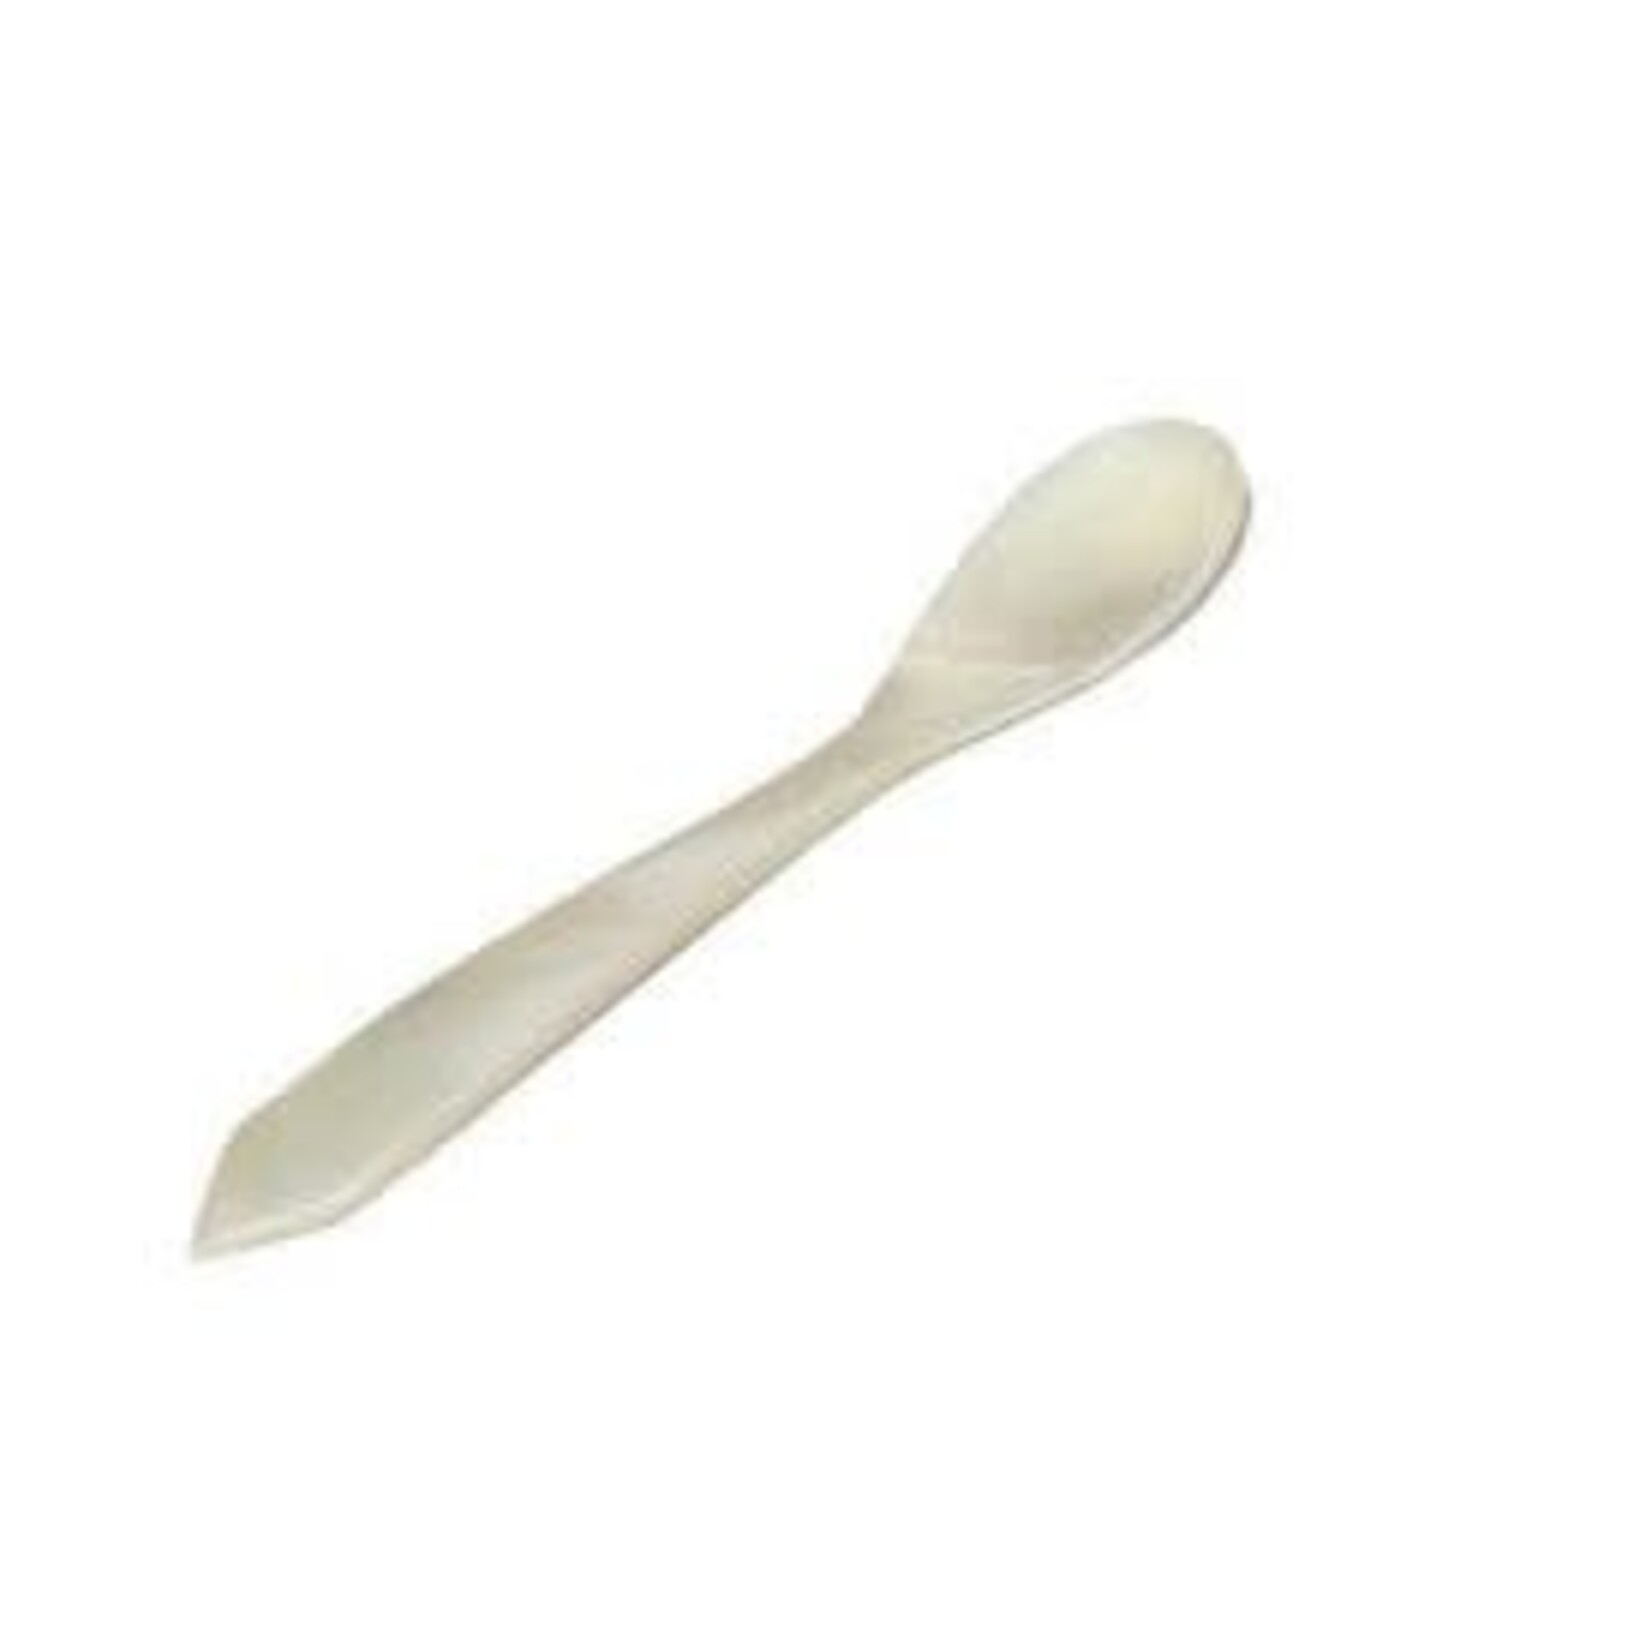 Frances Stoia Assoc Mother of Pearl Petite Tasting 2 oz Spoon